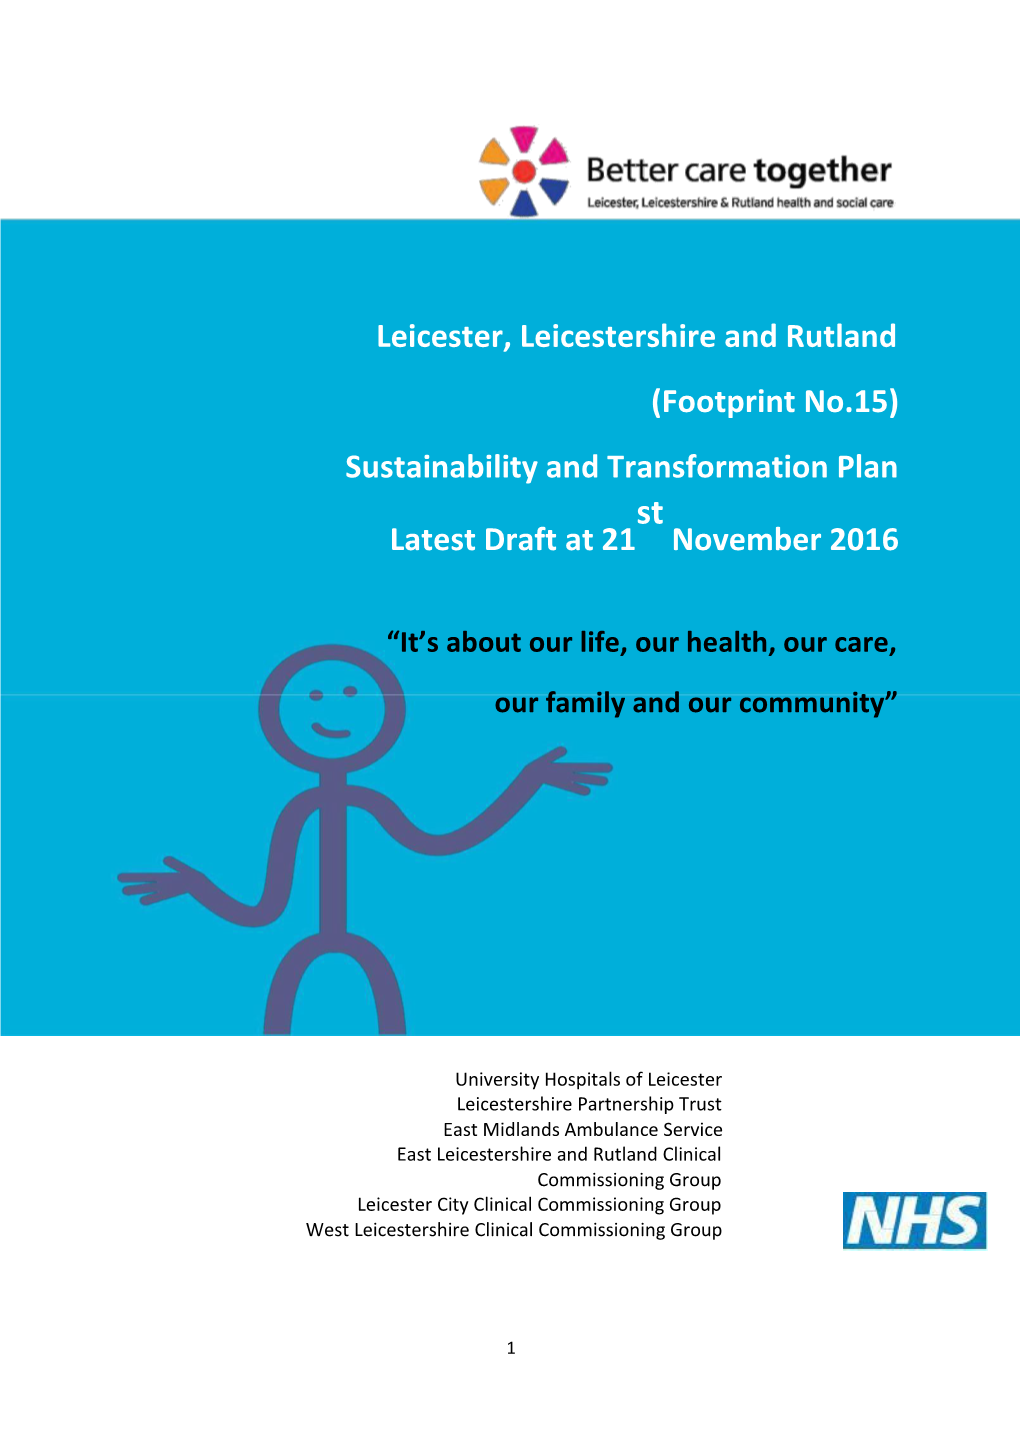 Leicester, Leicestershire and Rutland (Footprint No.15) Sustainability And